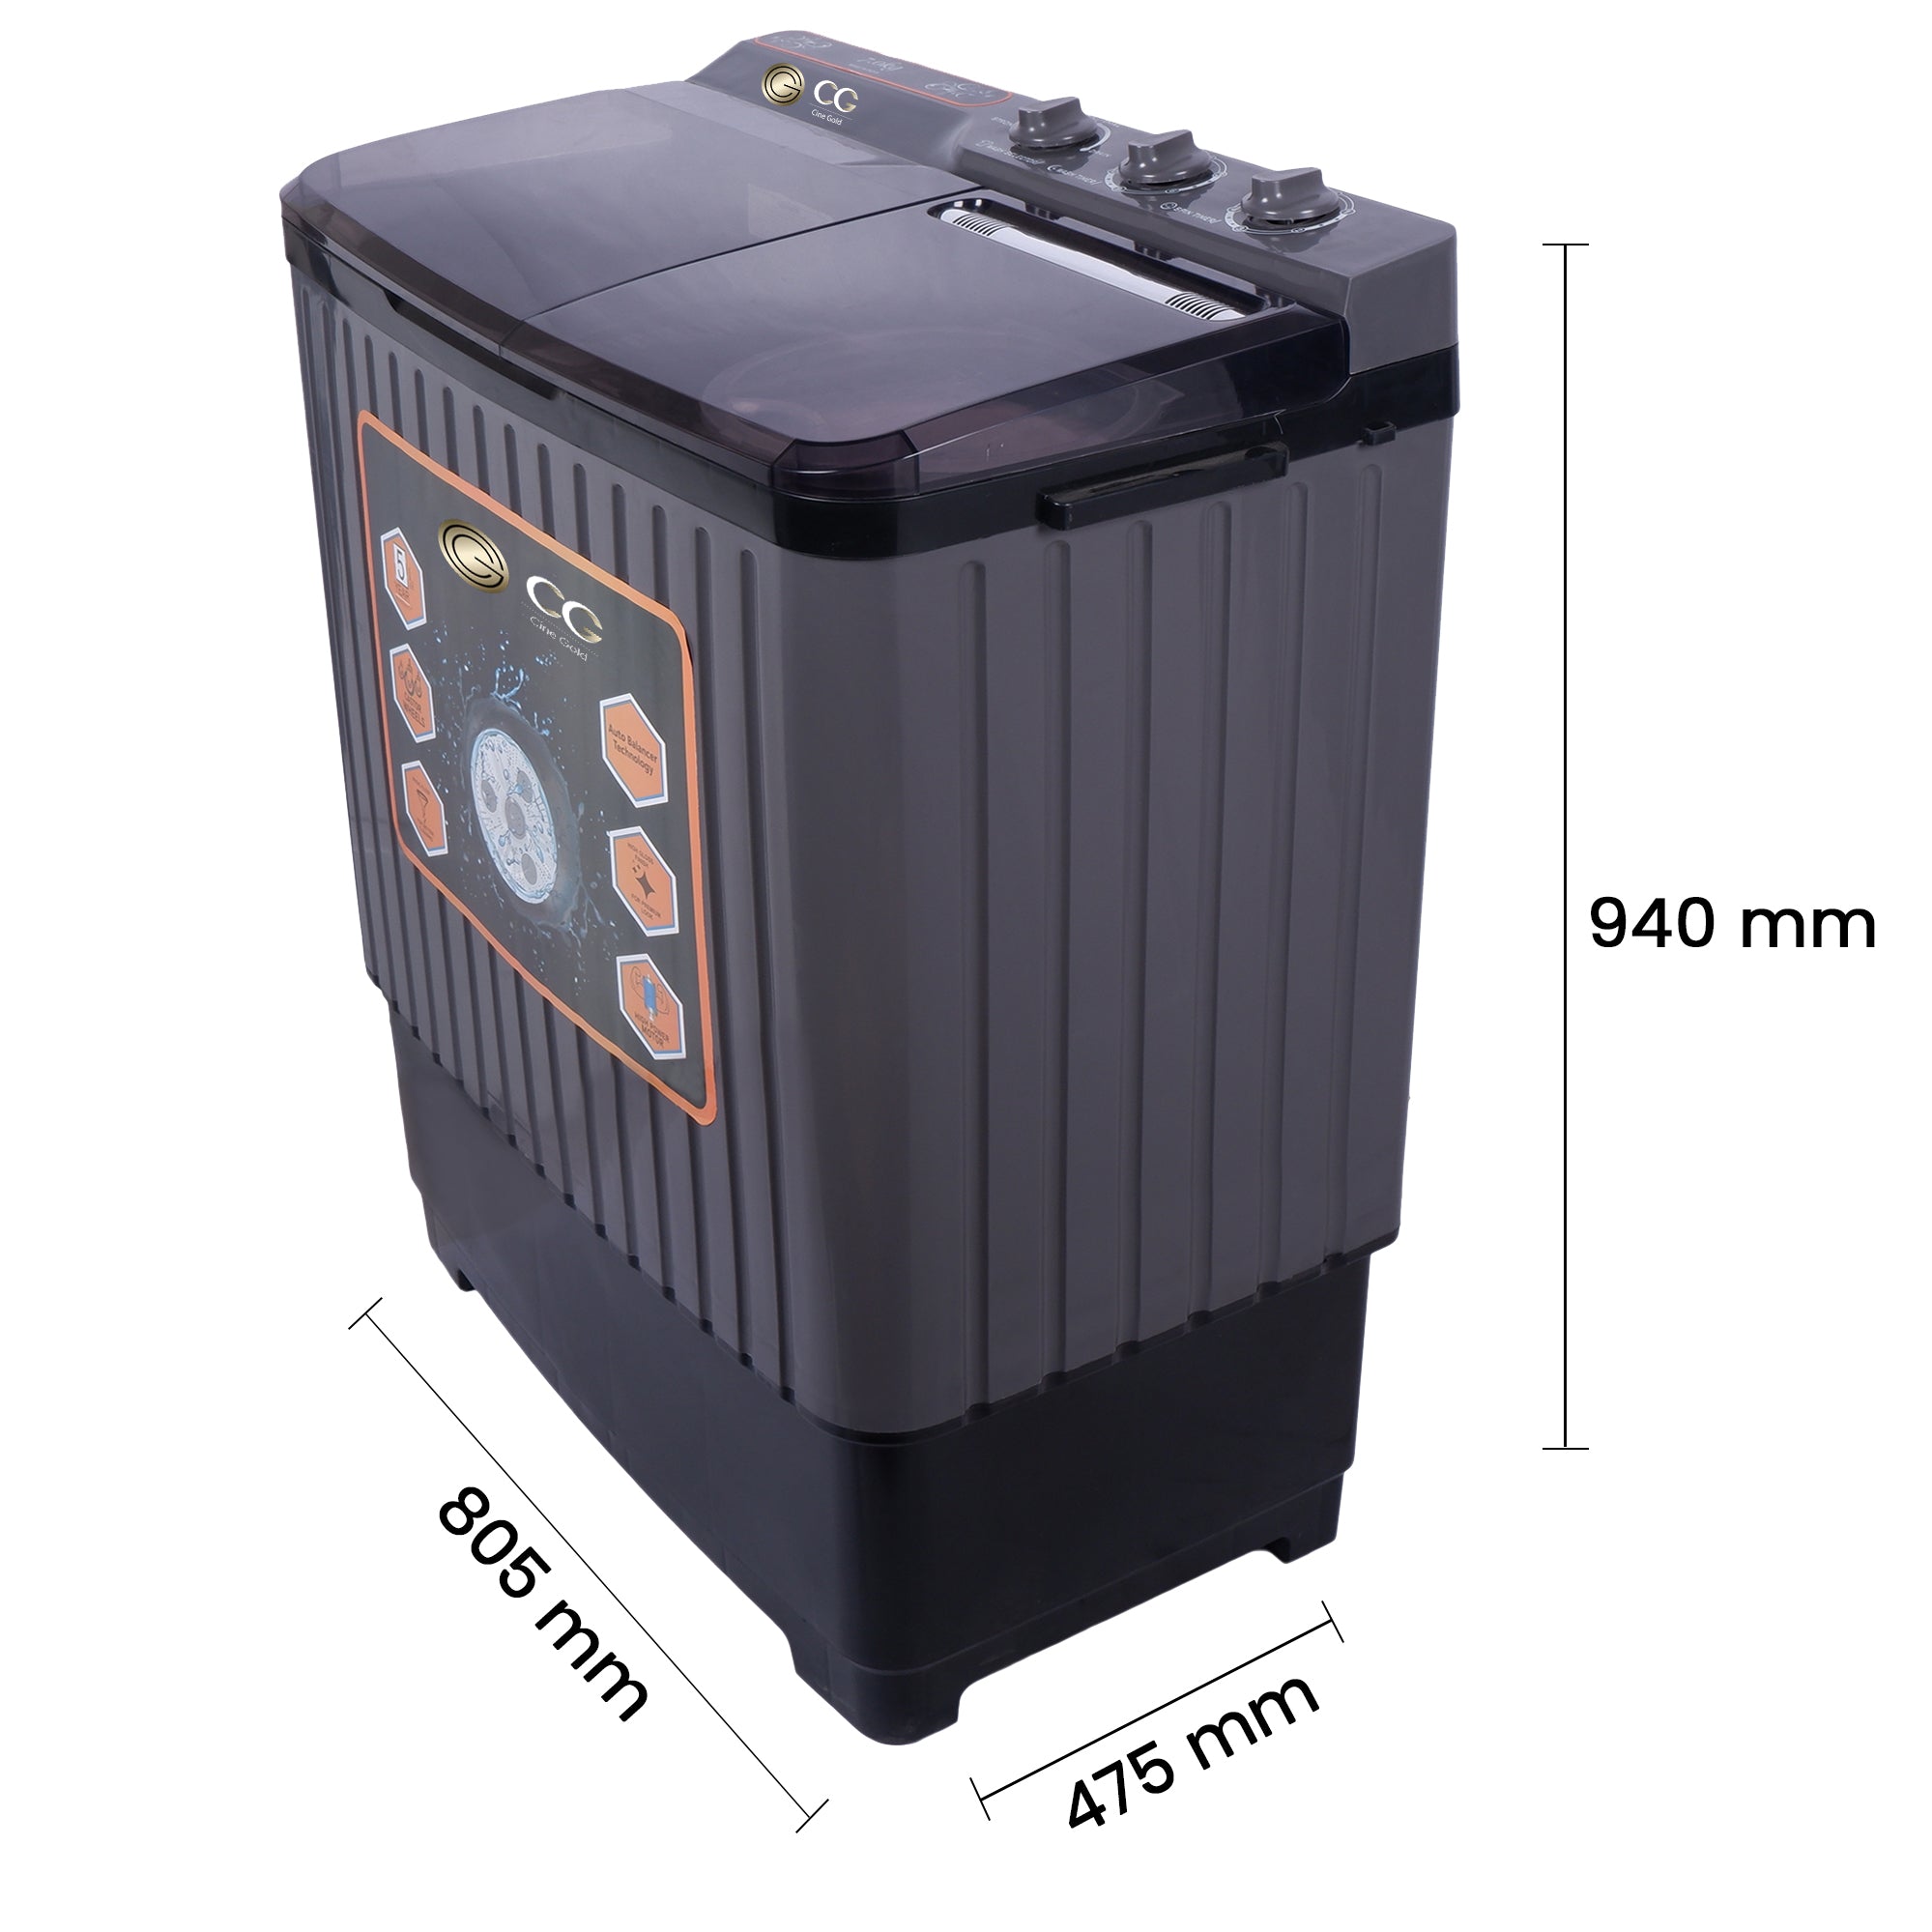 Cine Gold 7 Kg 5 Star Quick Air Dry Semi-Automatic Top Loading Washing Machine: Grey Opaque Top with Rat Away Feature